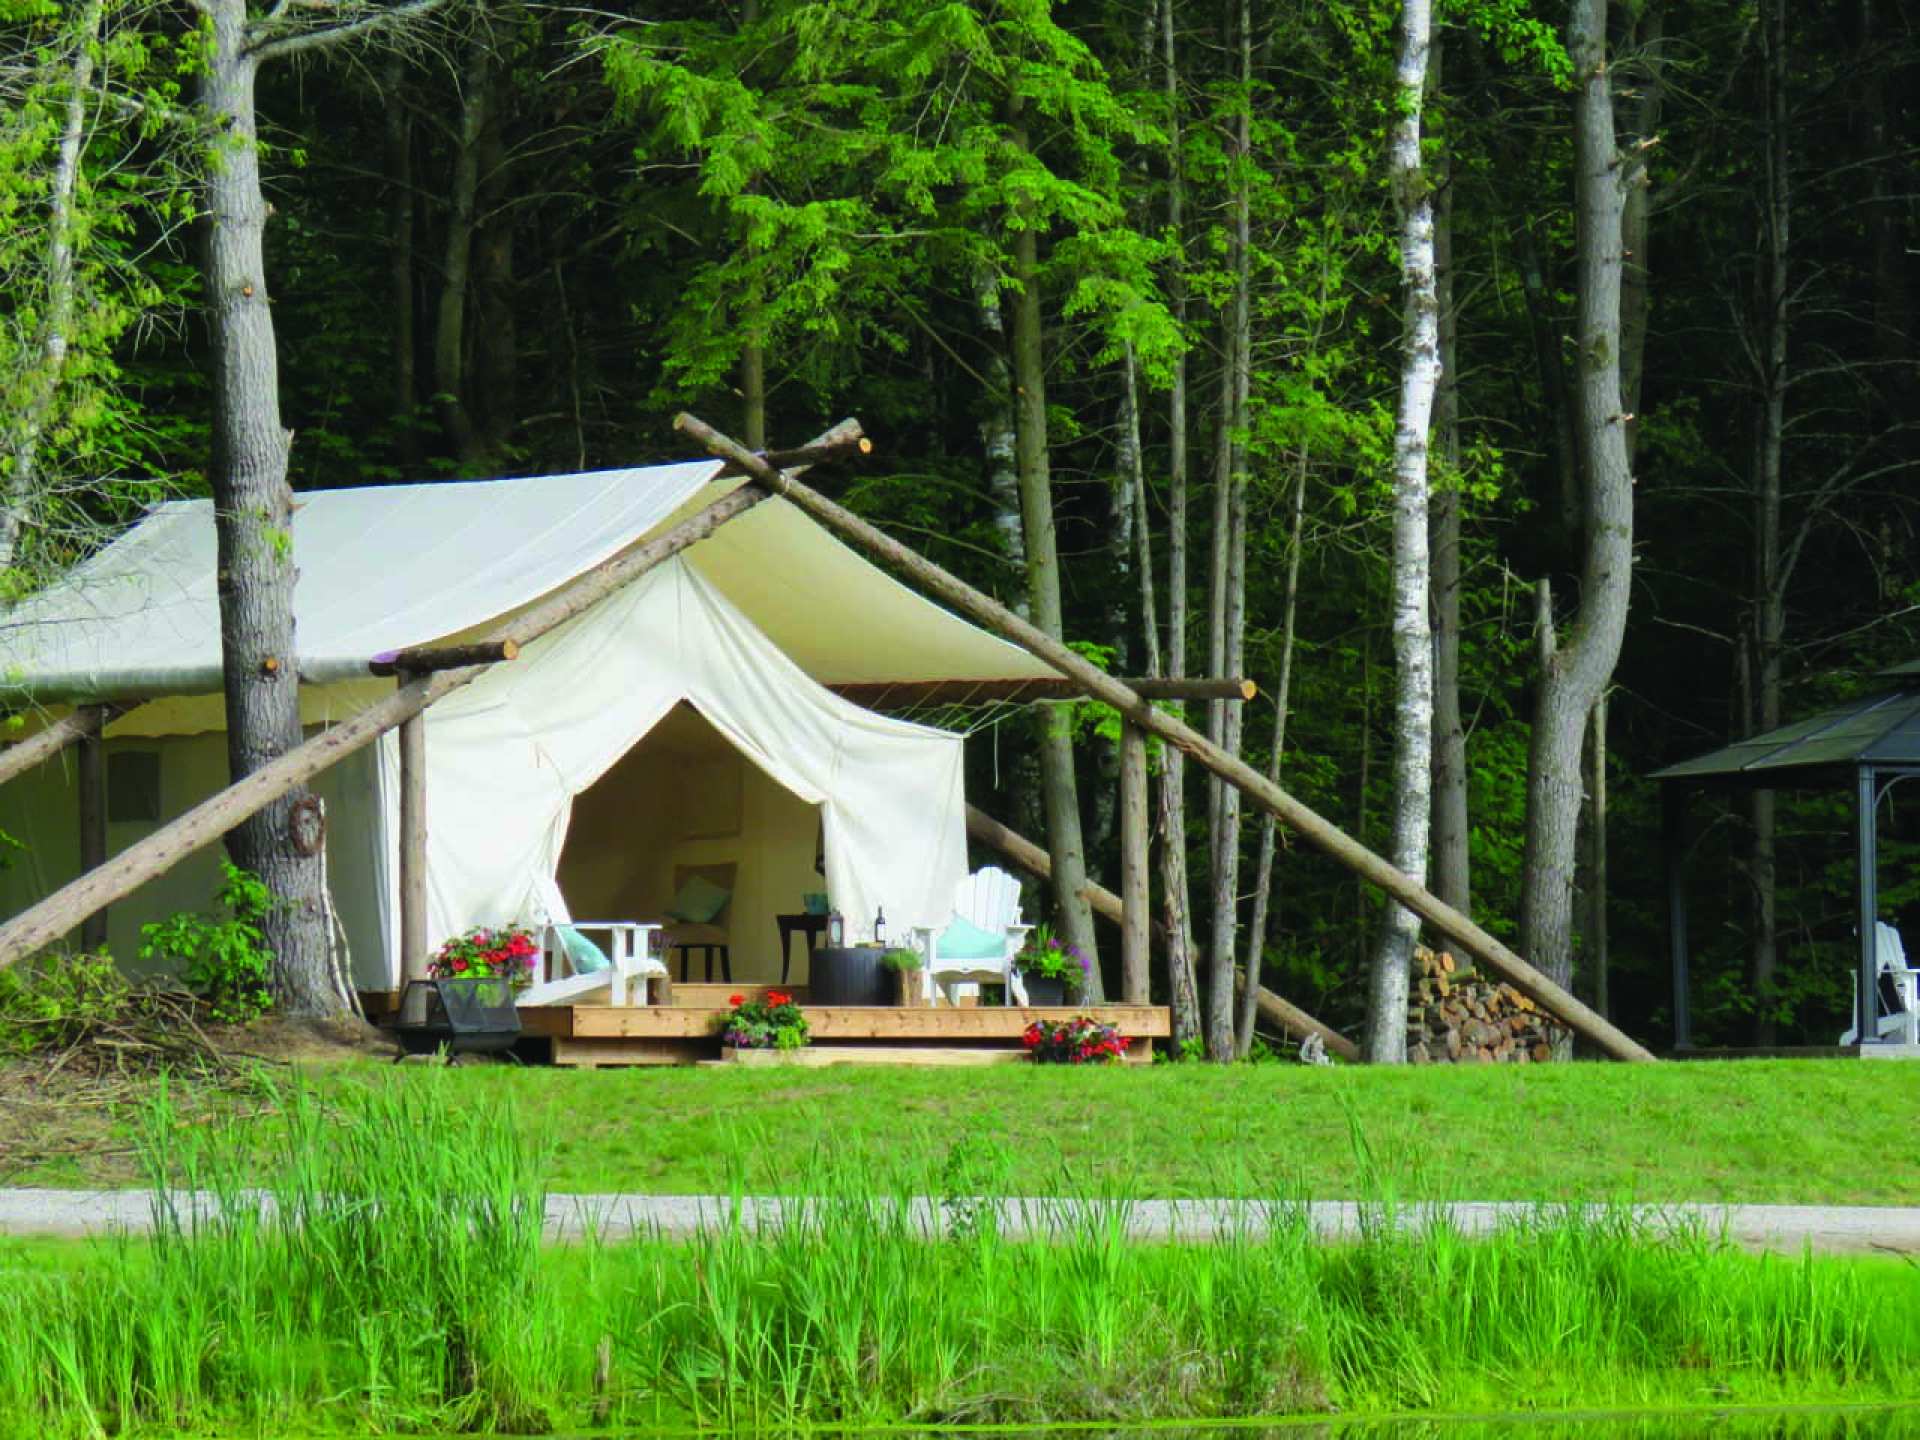 Ontario wellness retreats | A tent in the forest at Whispering Springs Ontario wellness retreat